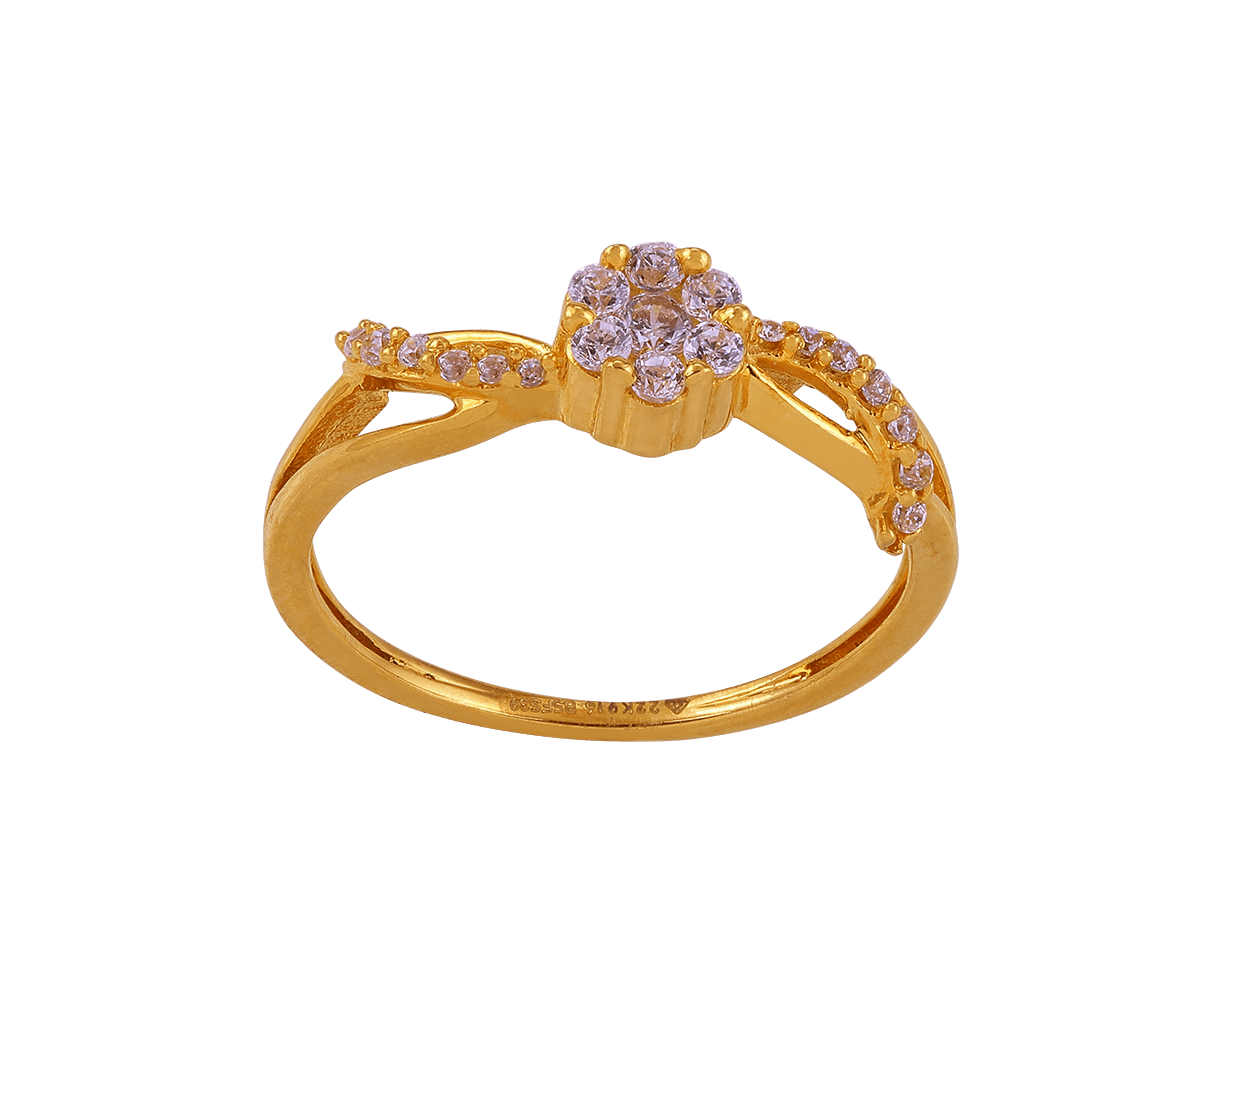 Bailey's Children's Collection Gold Diamond Ring – Bailey's Fine Jewelry